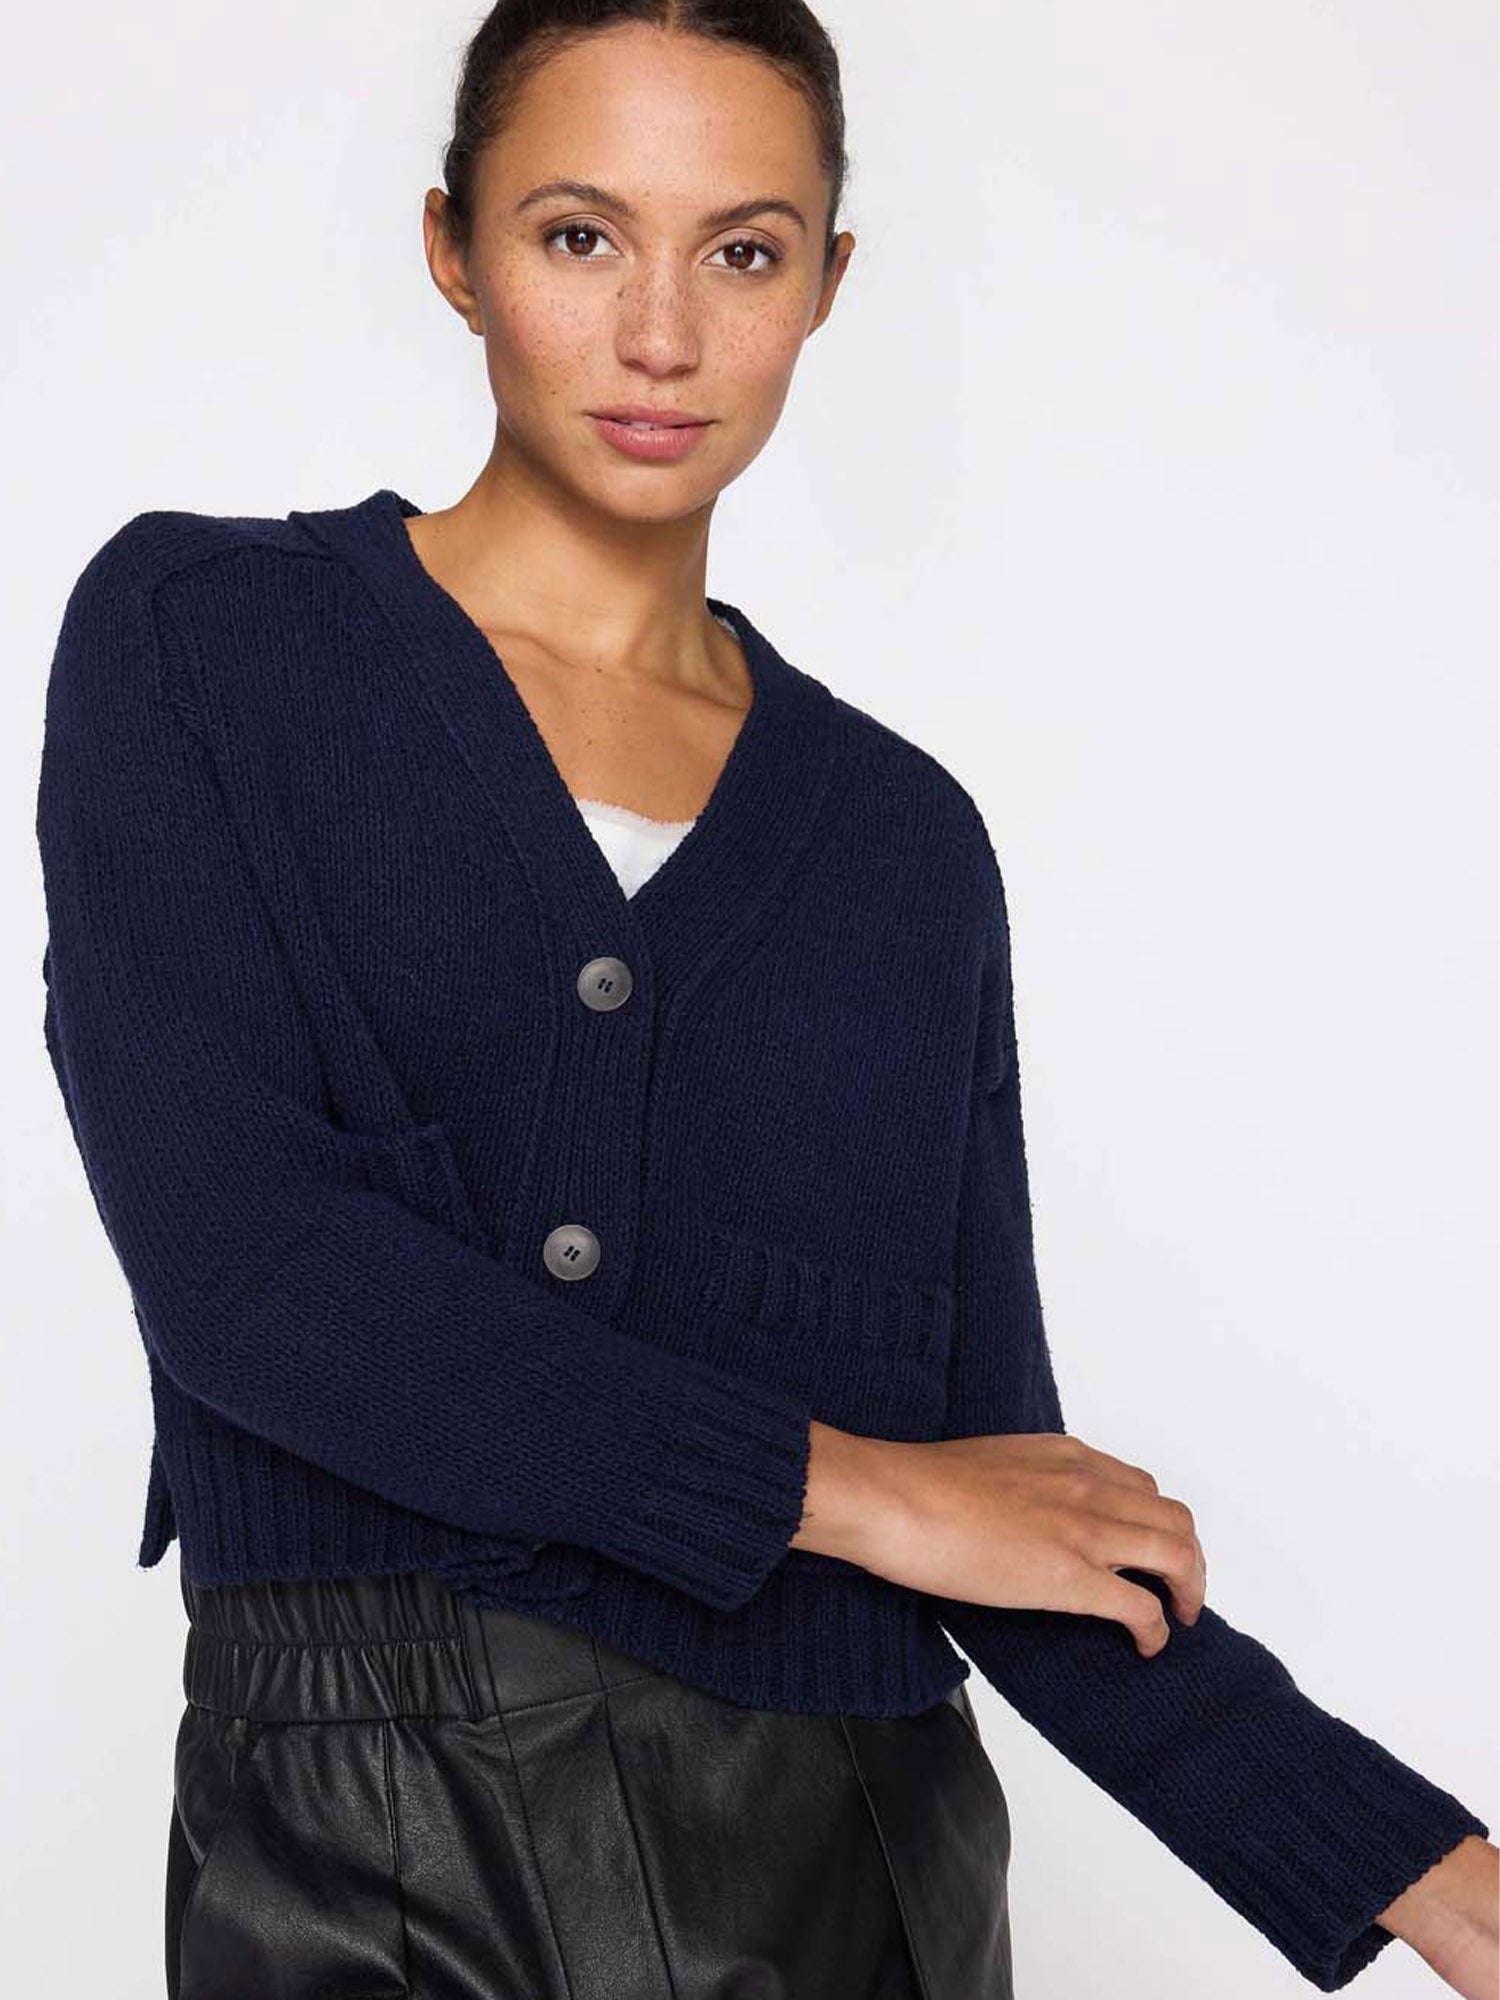 Cropped navy linen cotton cardigan sweater front view 3